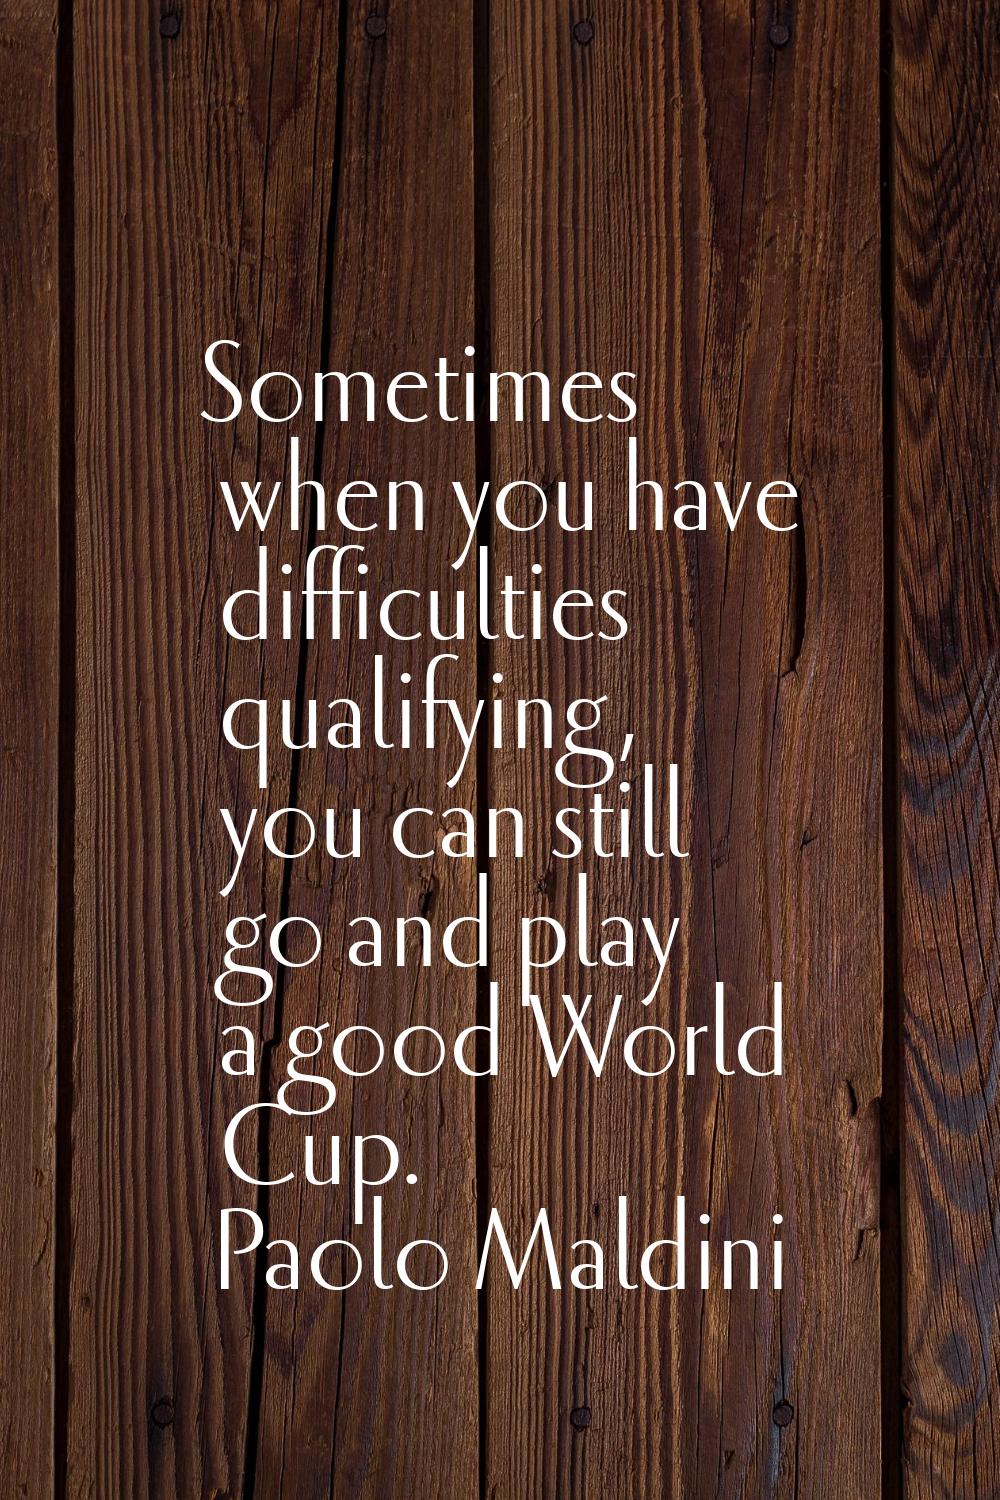 Sometimes when you have difficulties qualifying, you can still go and play a good World Cup.